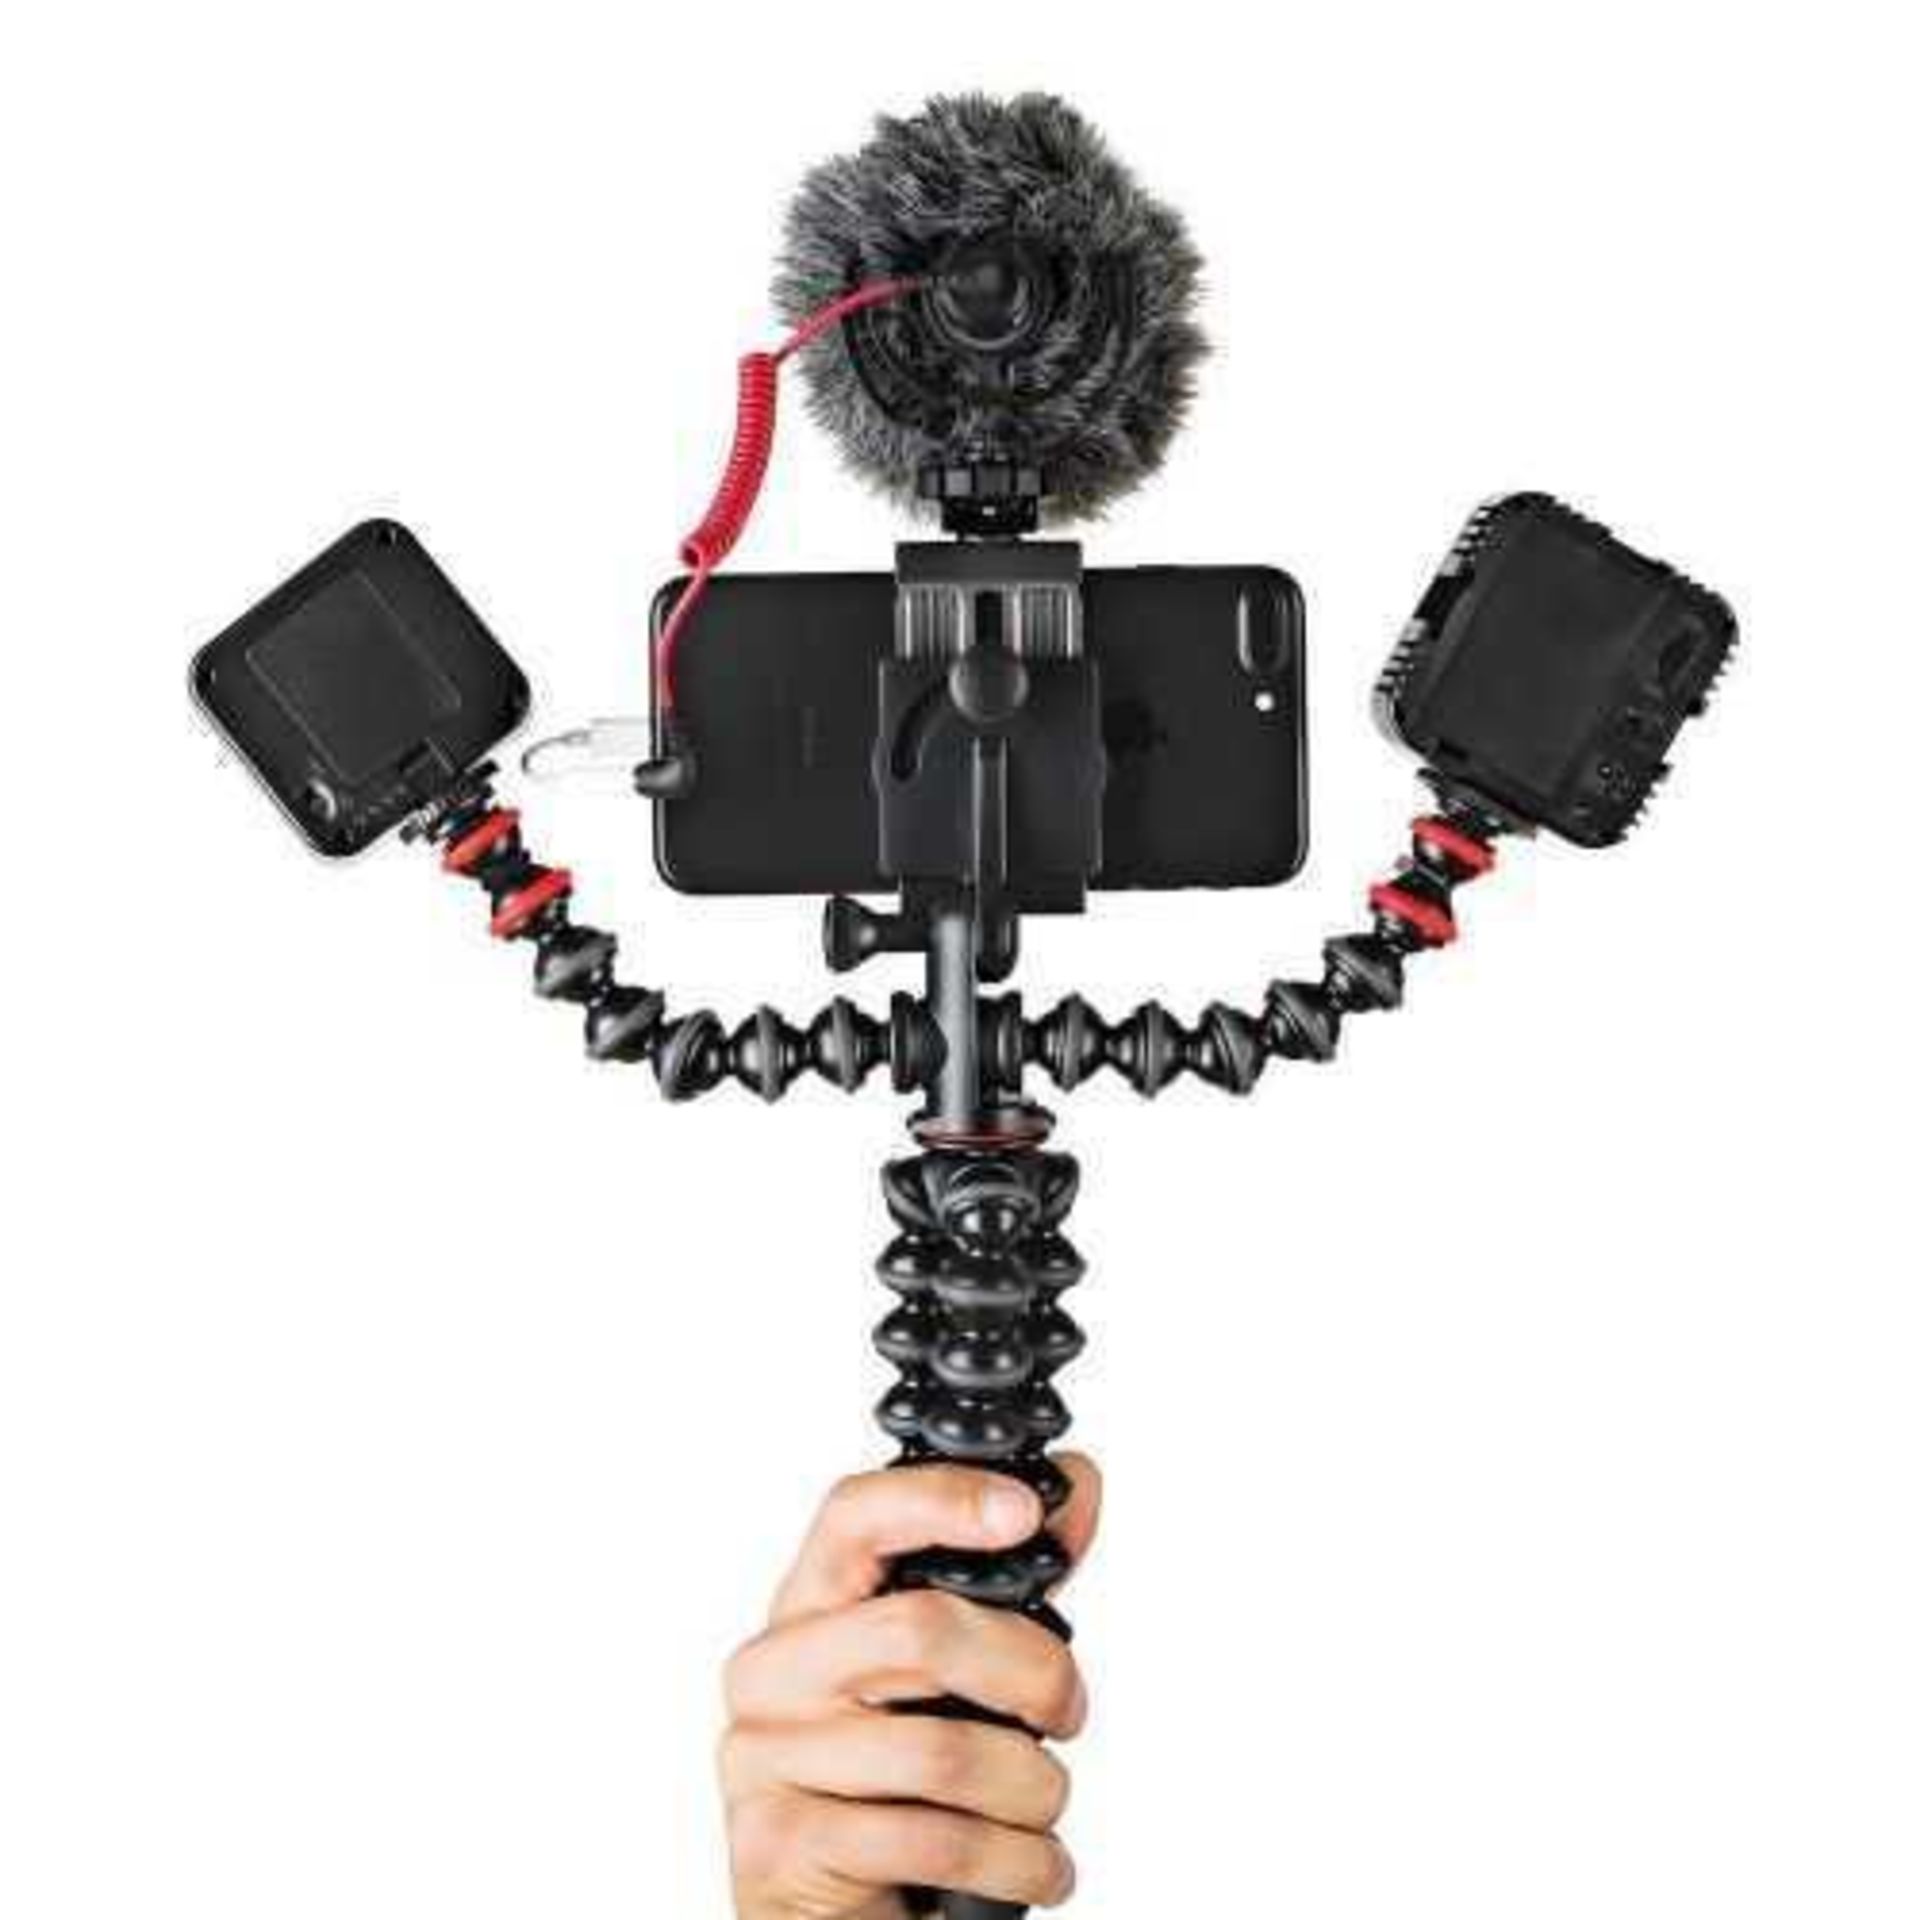 RRP Of £100 Boxed Joby Gorillapod Mobile Rig Tripod